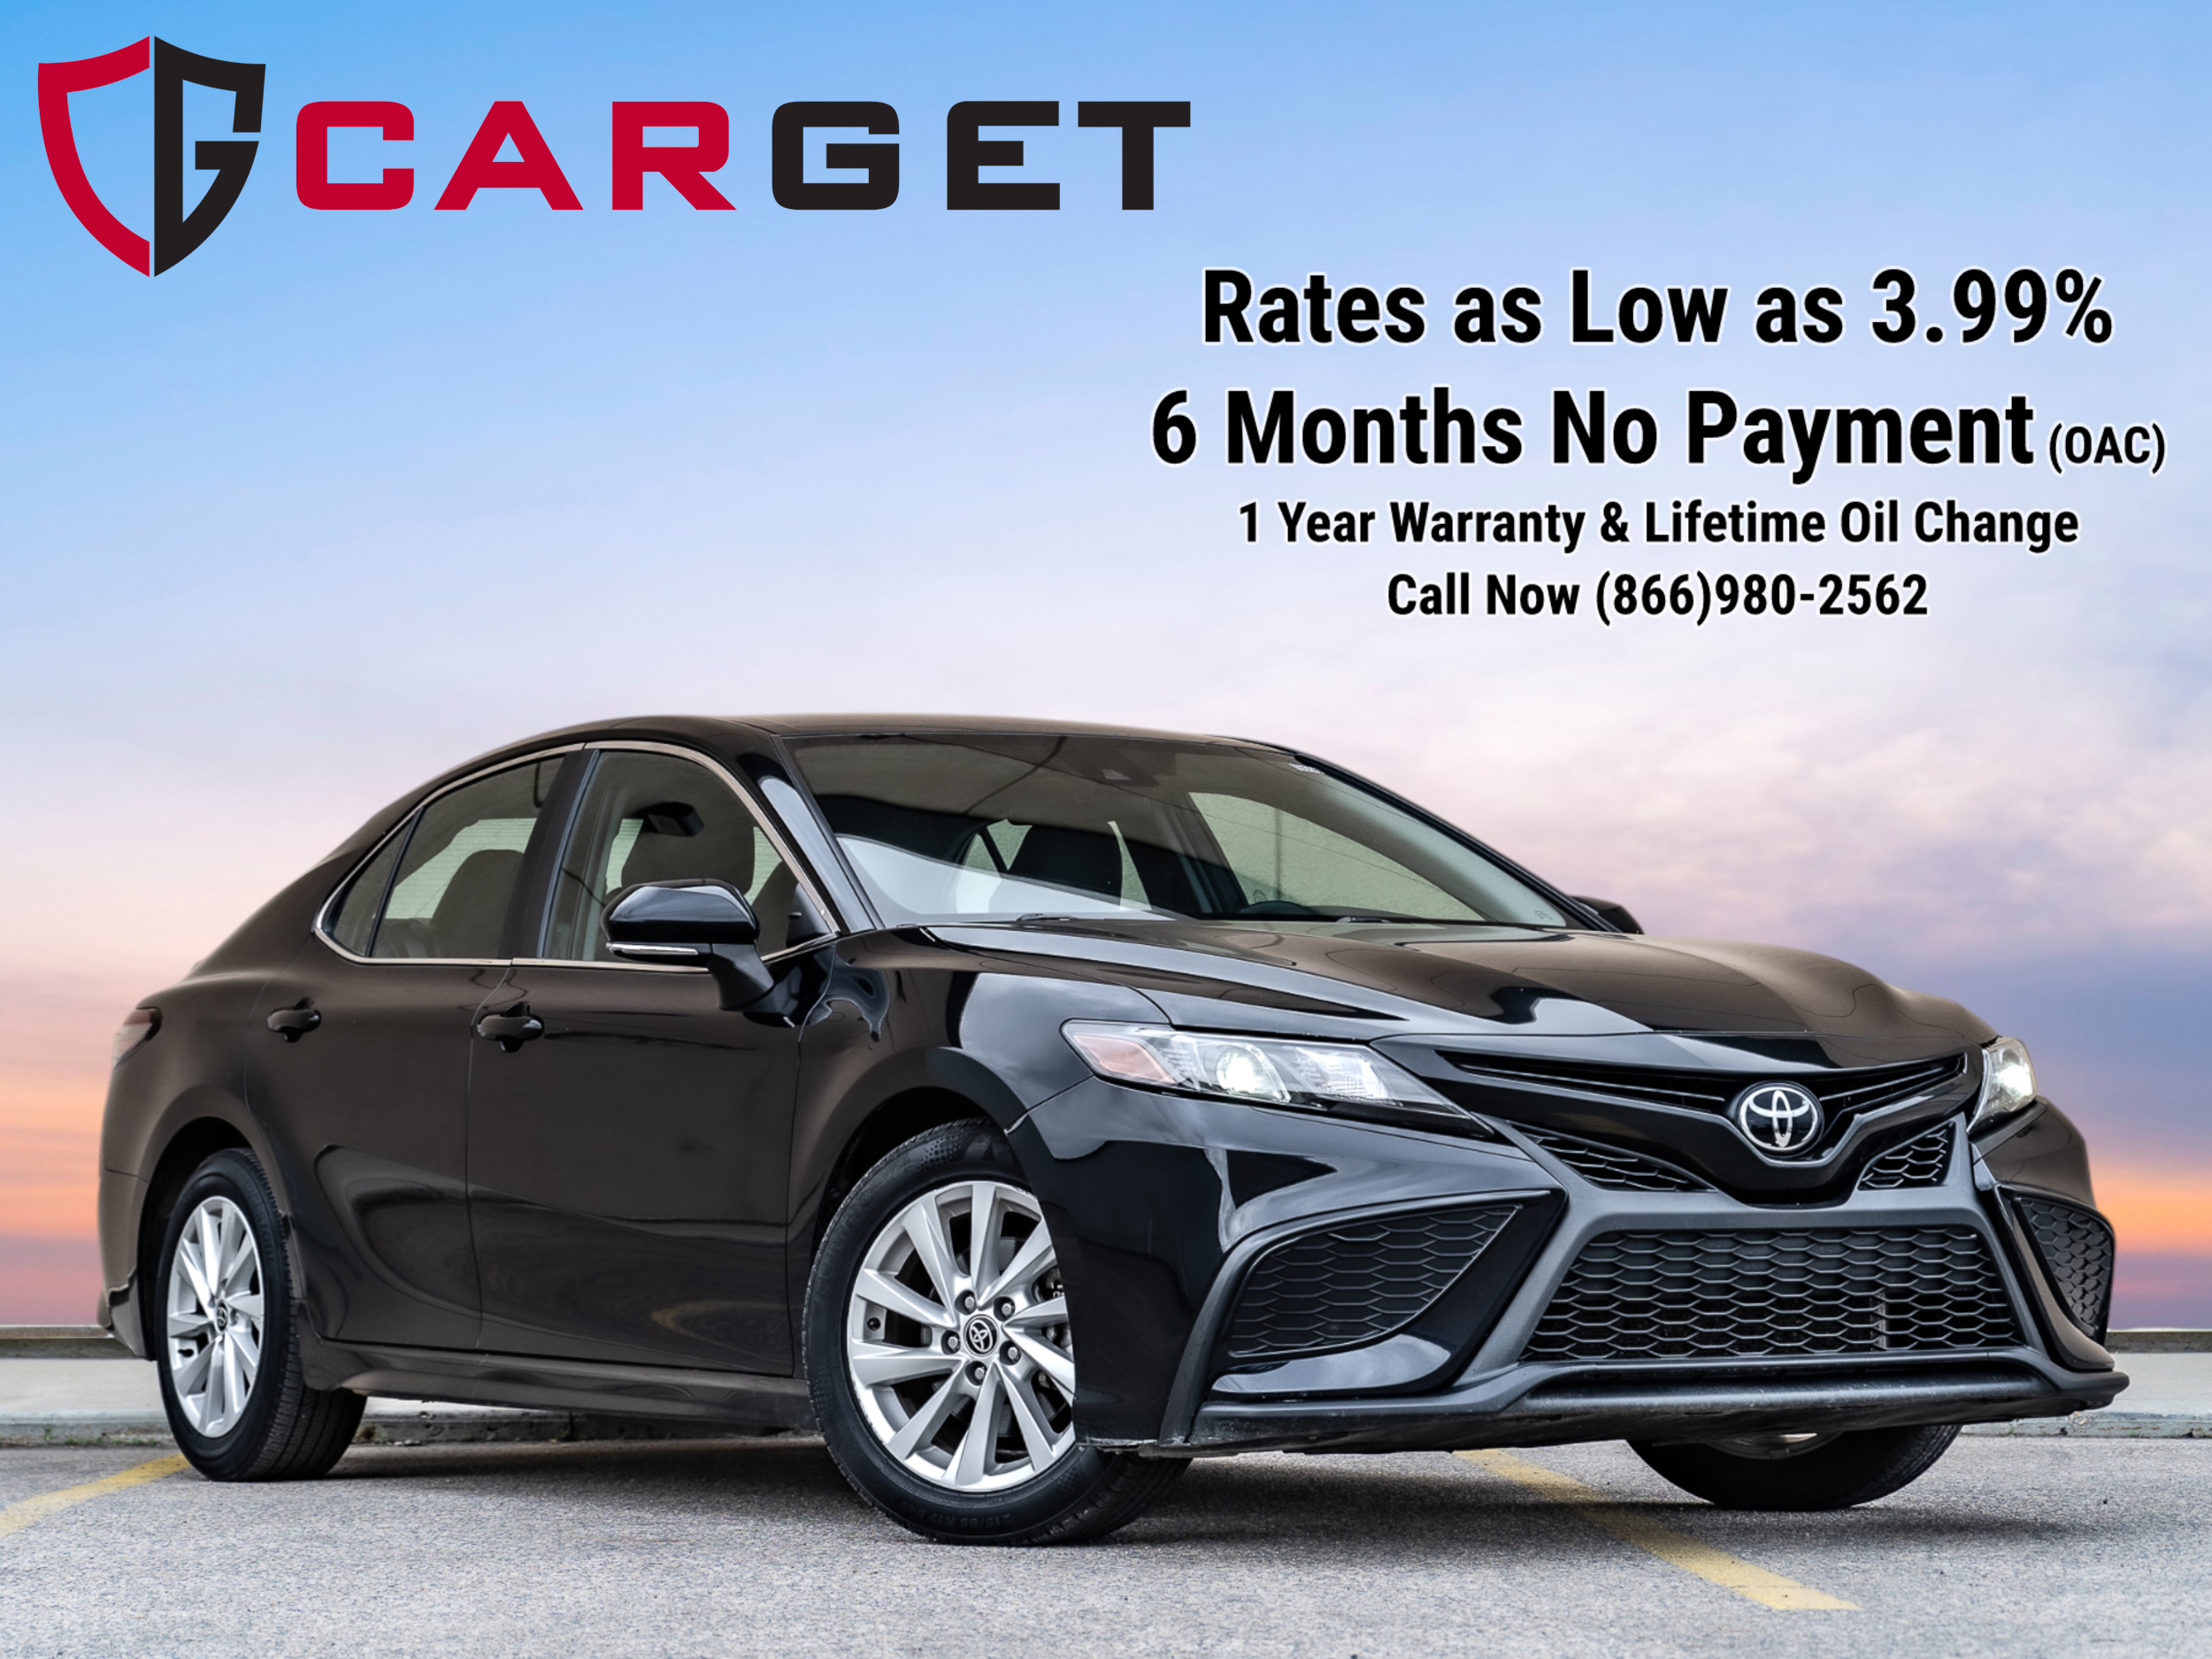 2022 Toyota Camry SE -1 OWNER| LEATHER SEATS| HEATED STEERING|BT